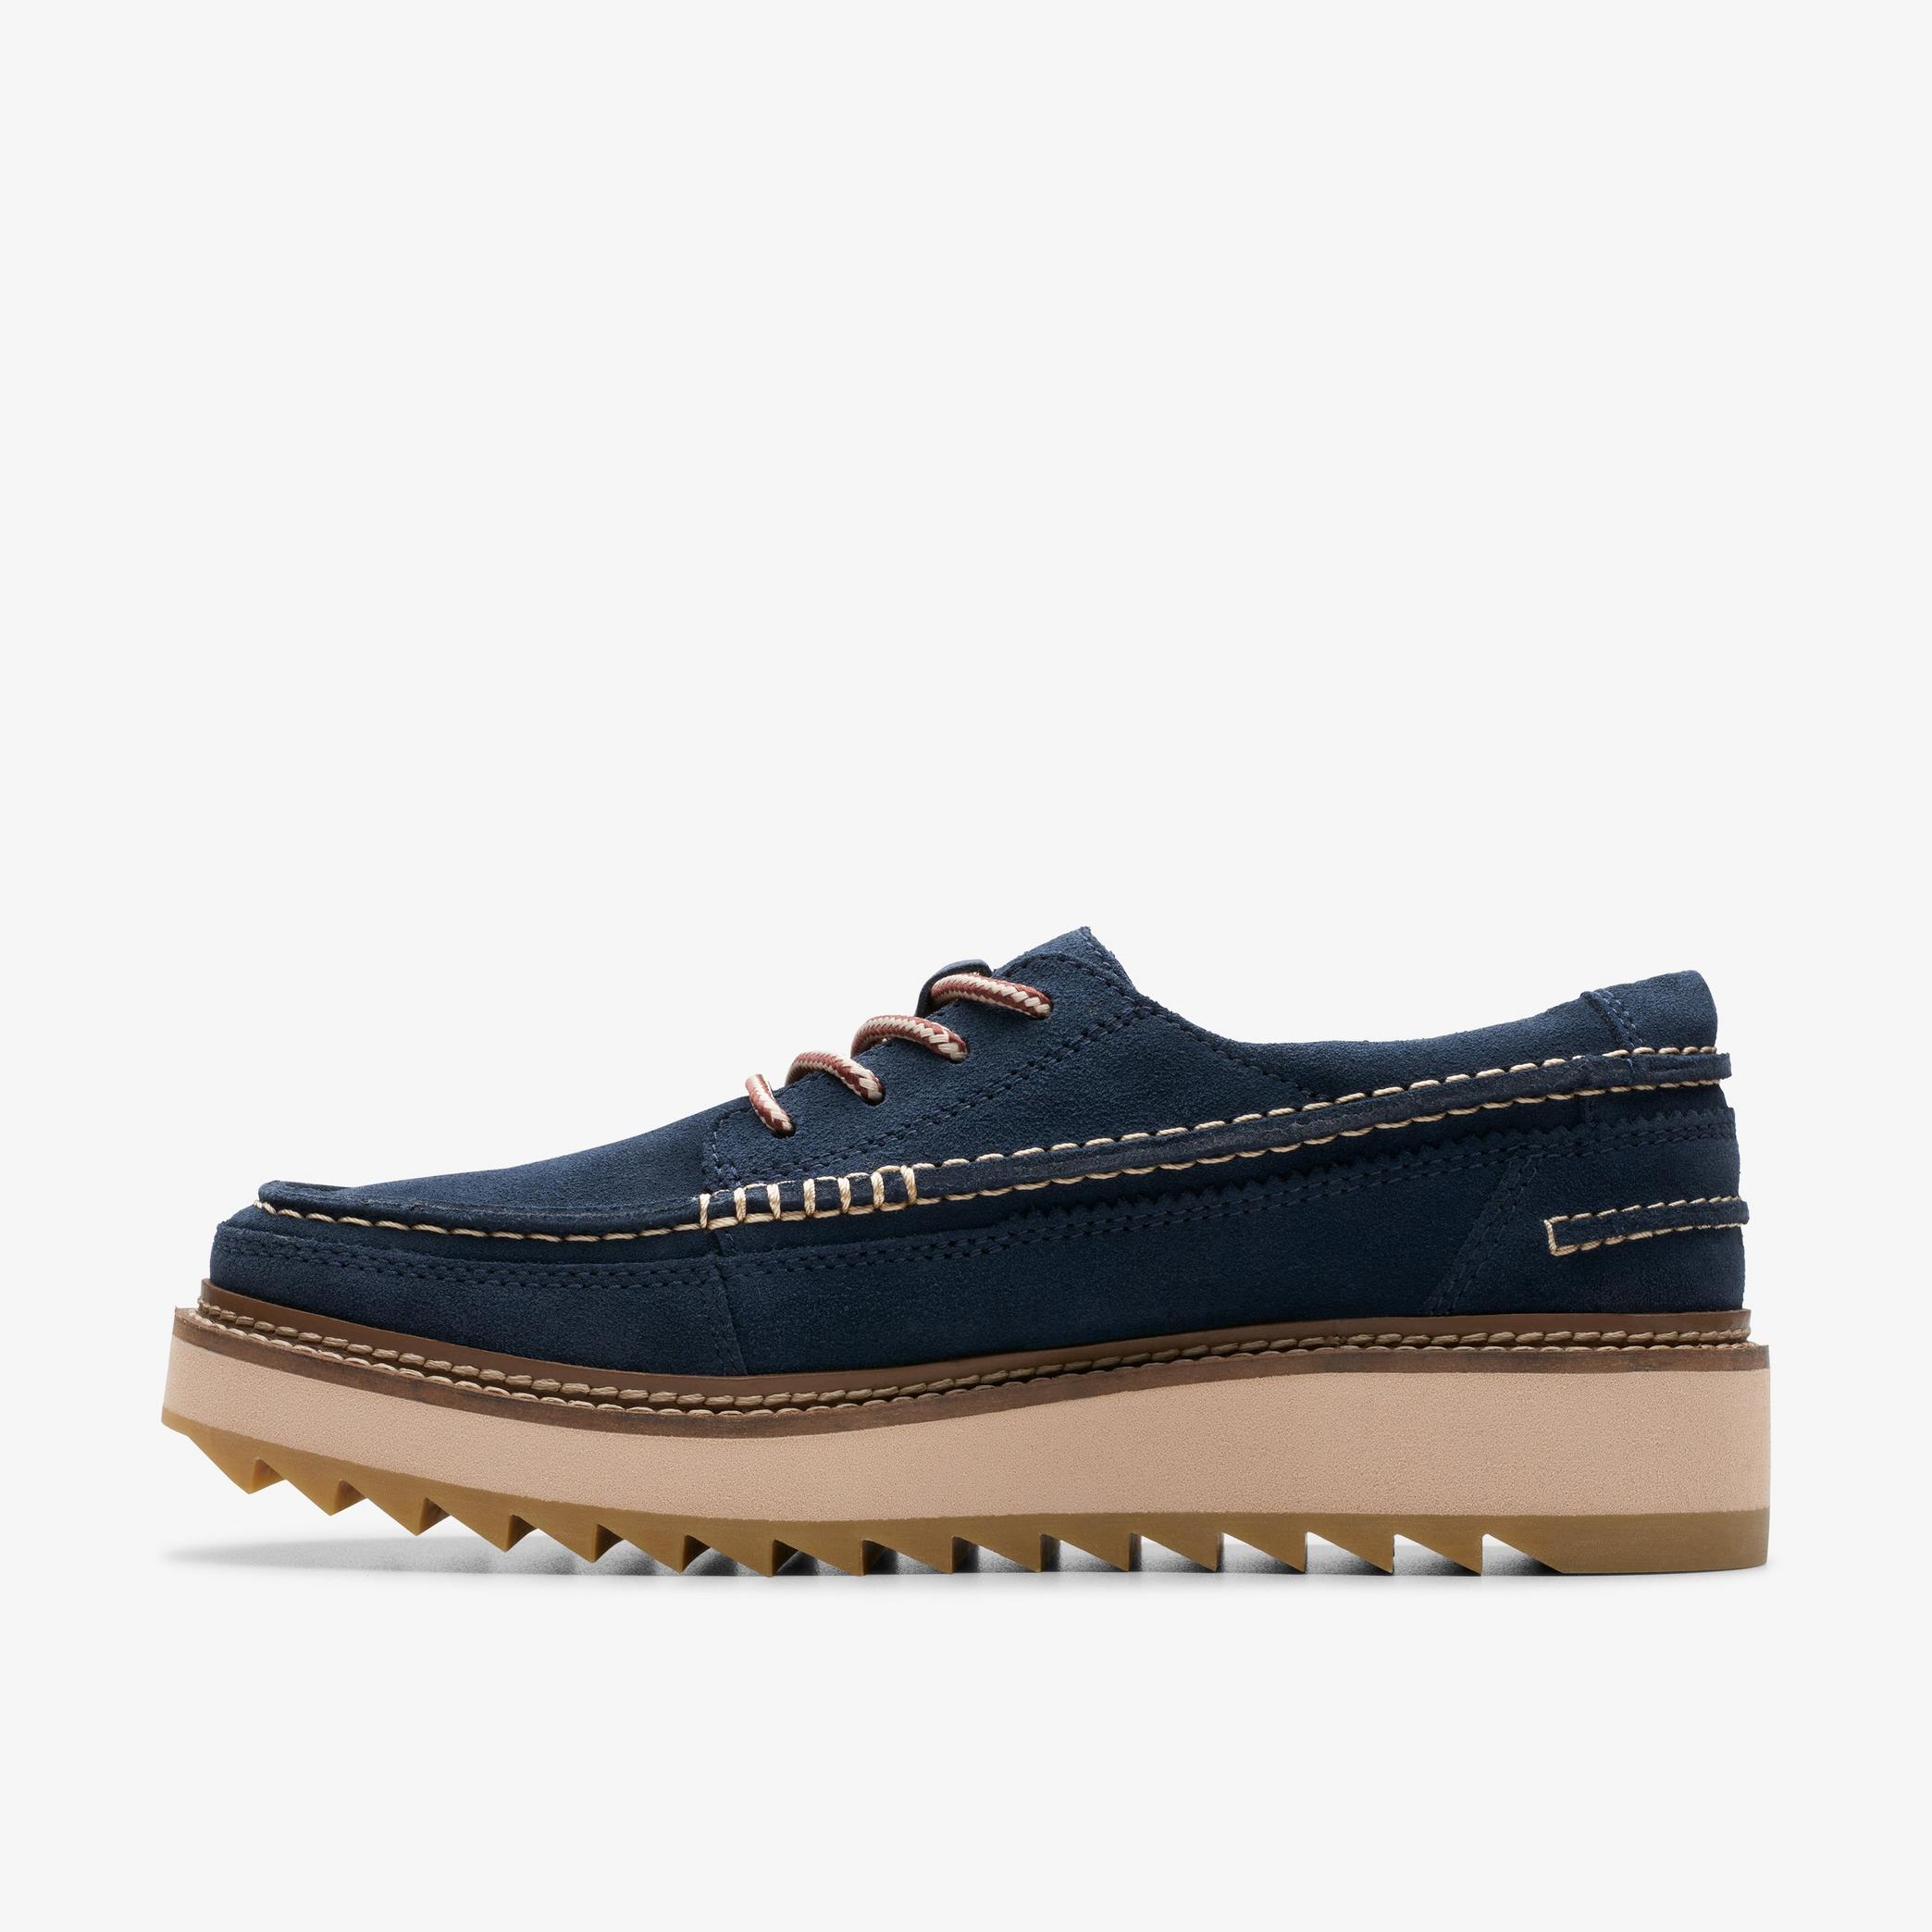 Clarkhill Lace Navy Suede Moccasins, view 2 of 6